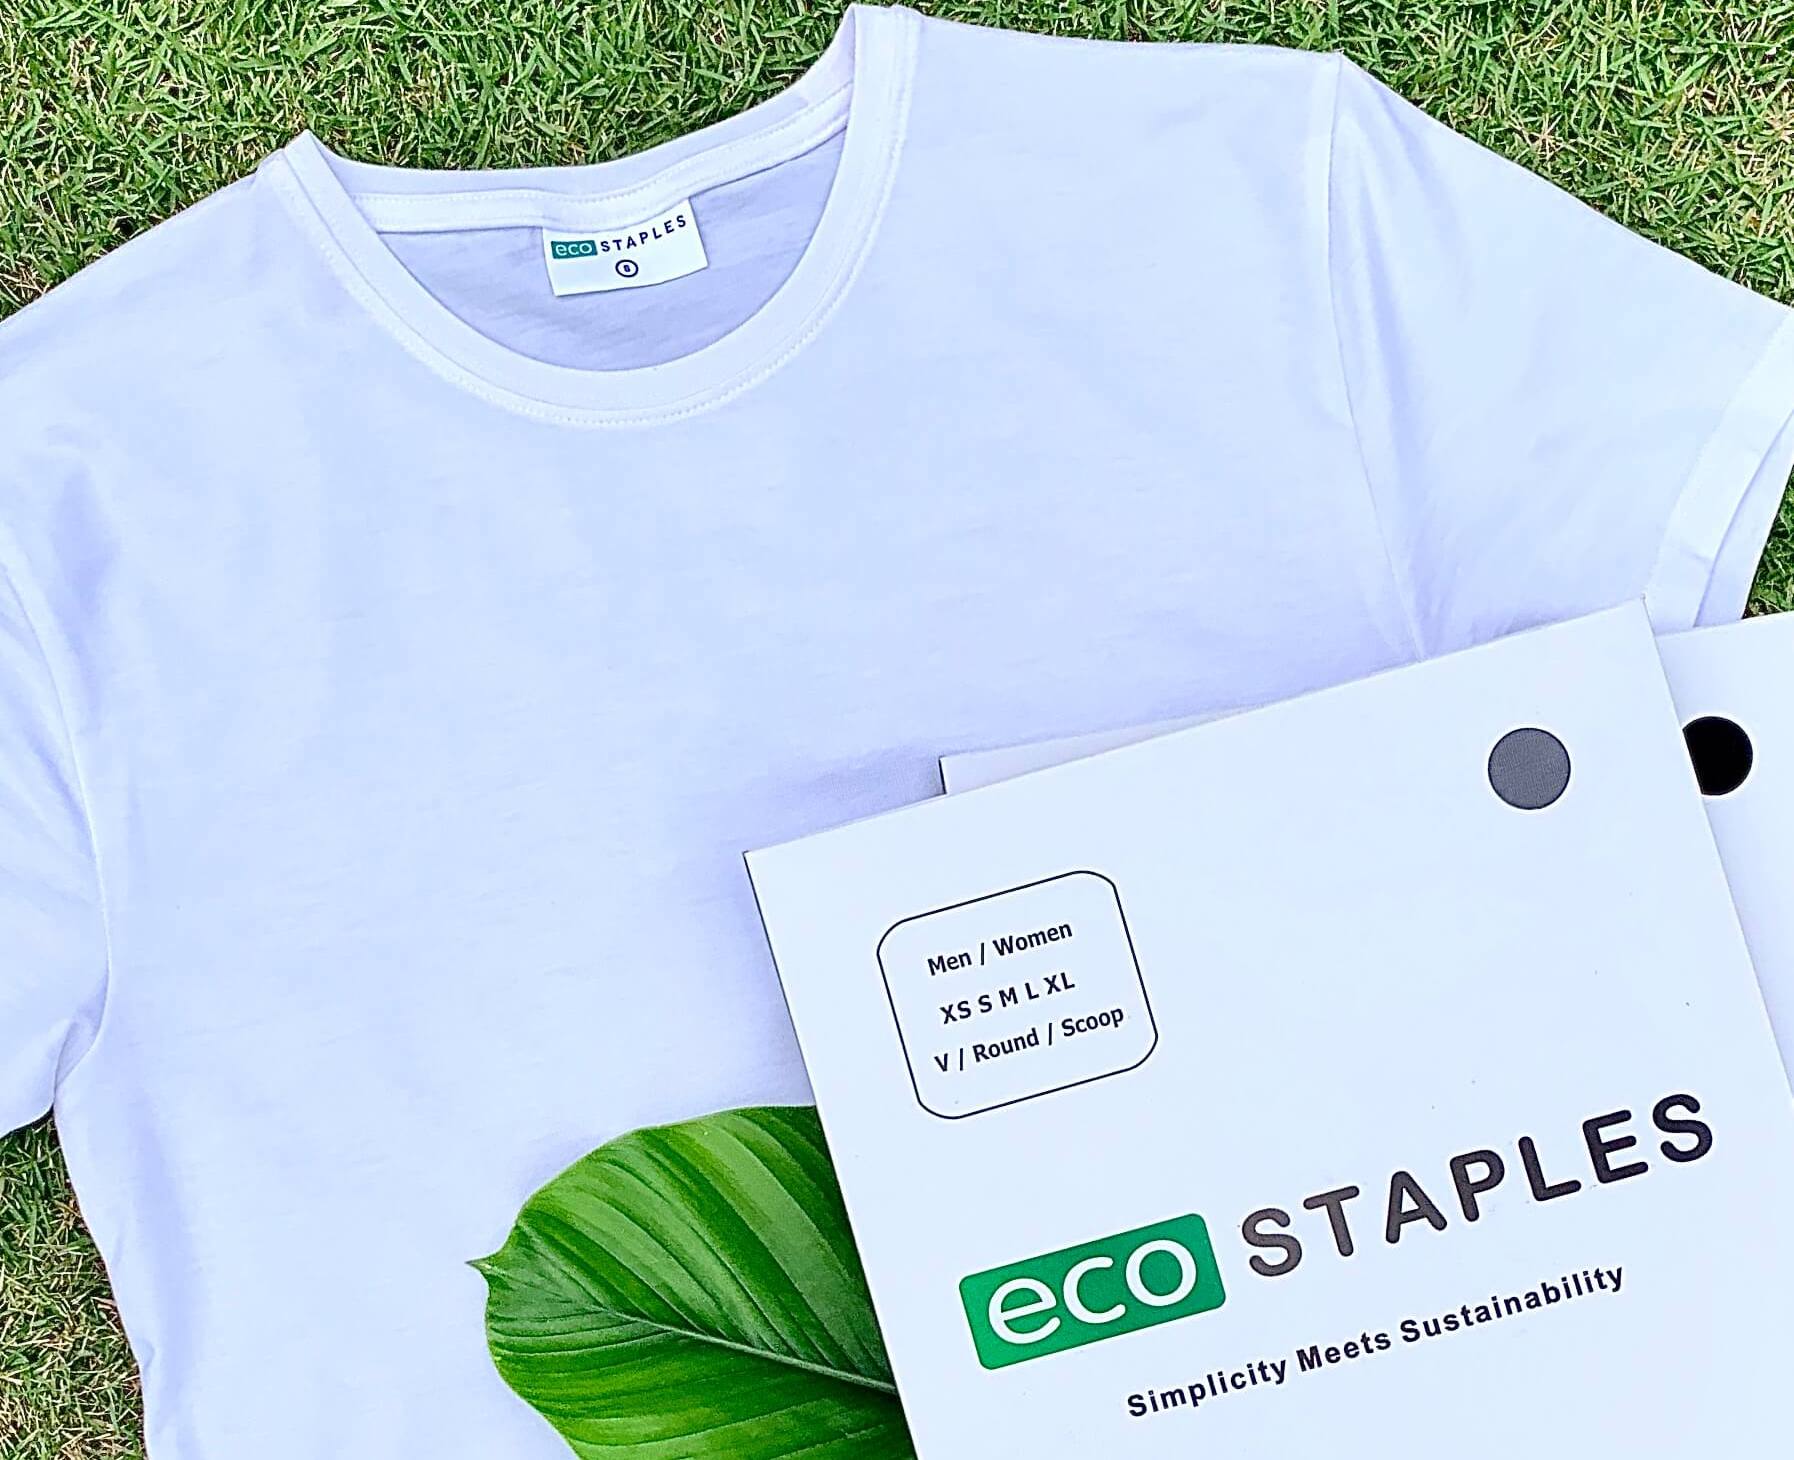 Eco Staples Corporate Orders Bamboo T-shirts, Polos and apparel